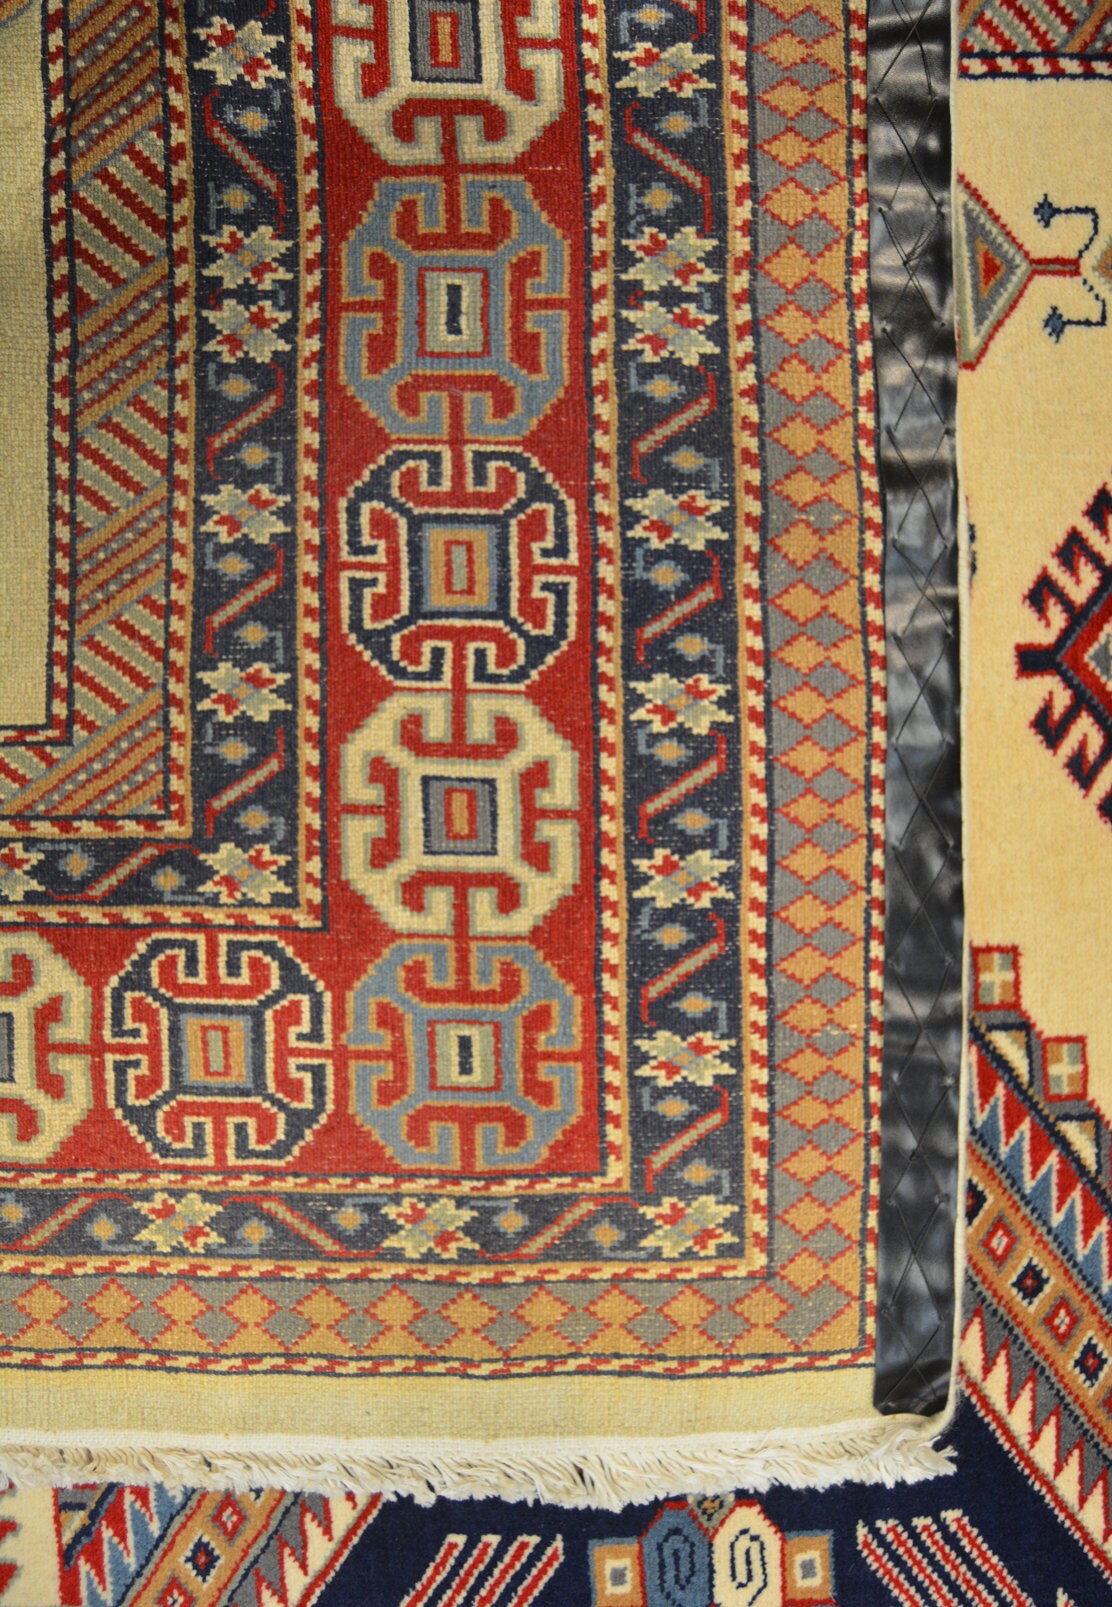 Fine St-Petersburg Kazakh Carpet | 8'8" x 7'' | Home Decor | Hand-knotted Wool Area Rug